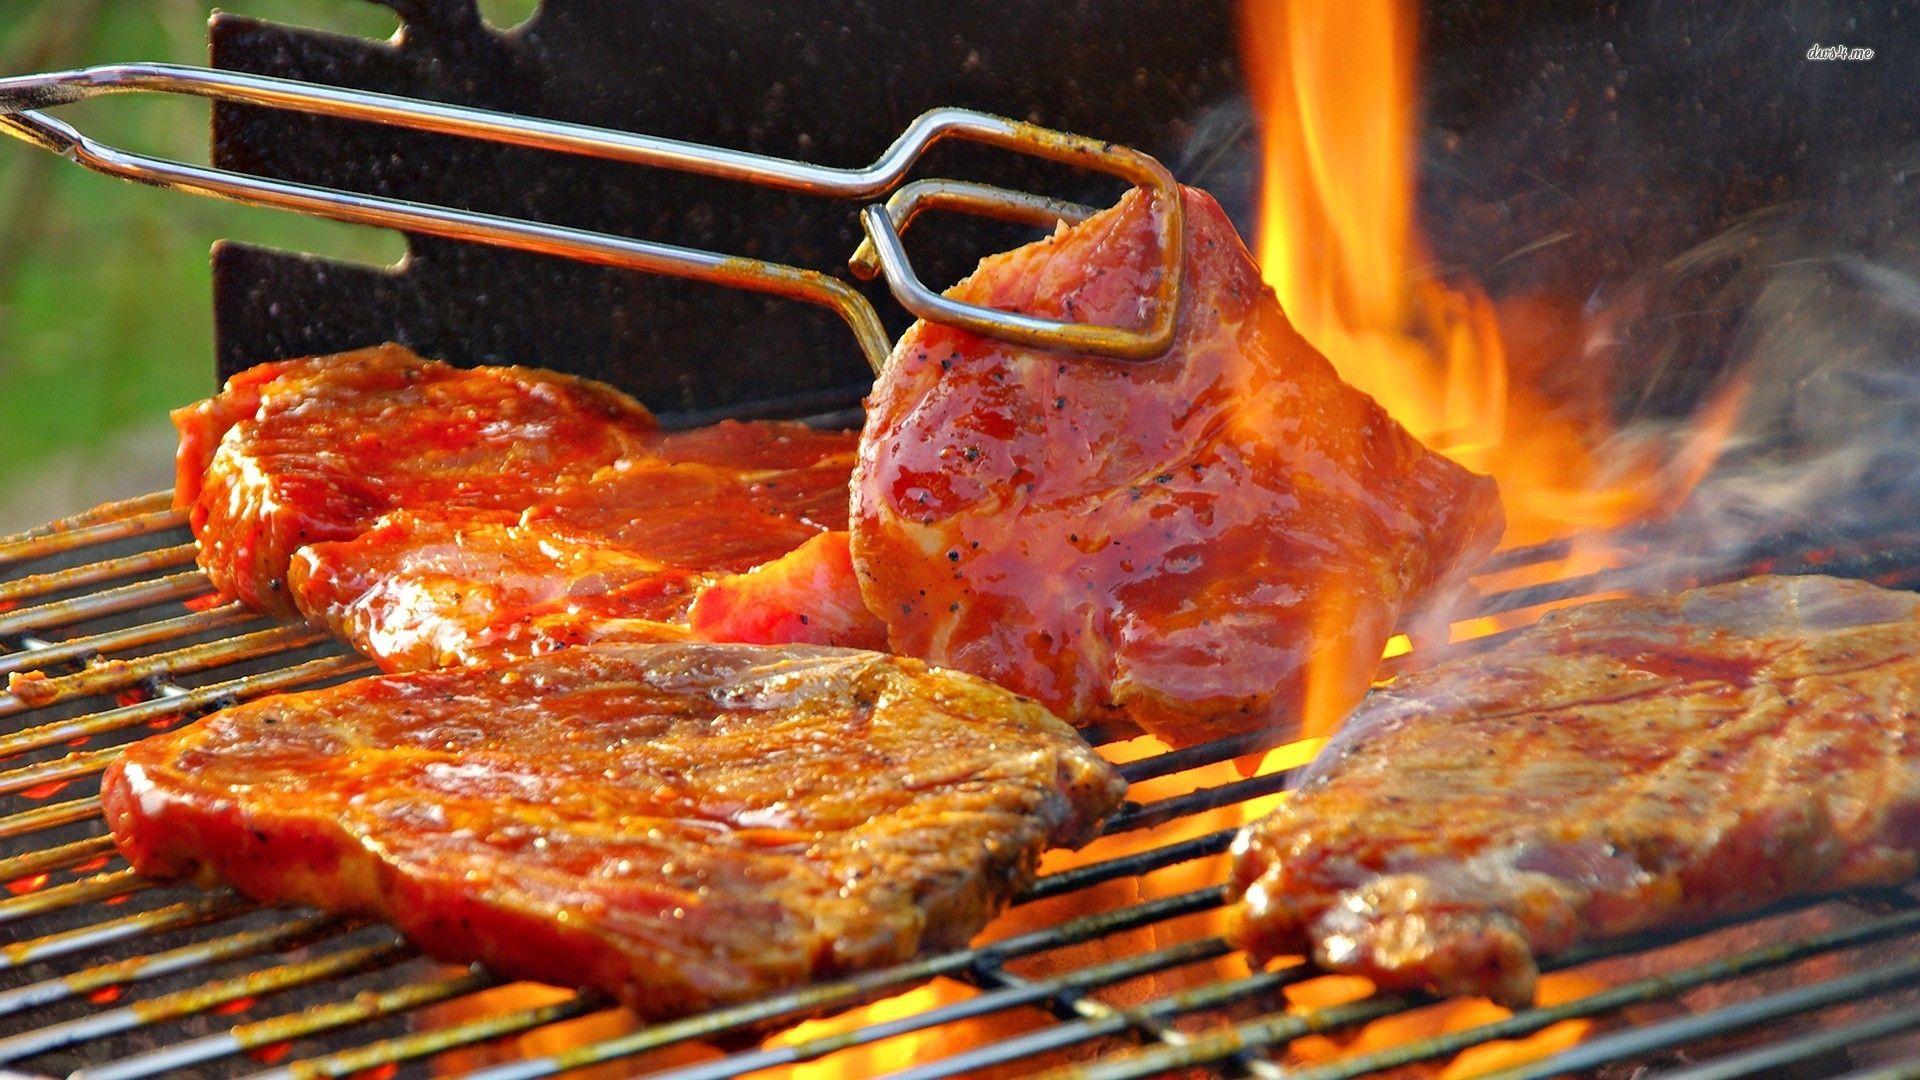 Barbecue Photos Download The BEST Free Barbecue Stock Photos  HD Images